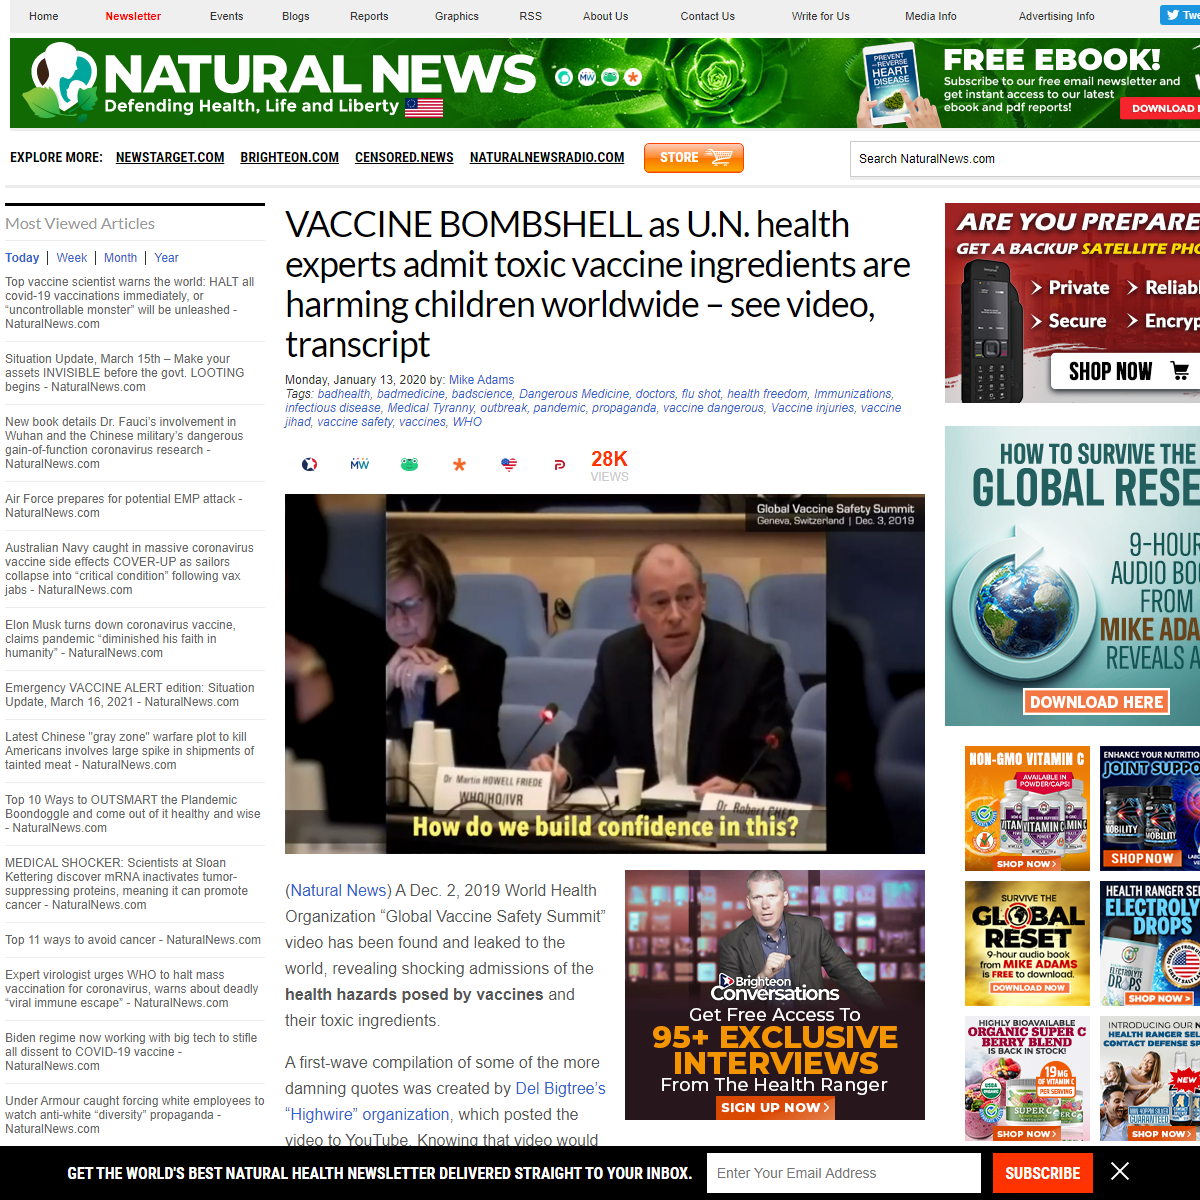 A complete backup of https://www.naturalnews.com/2020-01-13-un-health-experts-admit-toxic-vaccine-ingredients-are-harming-childr